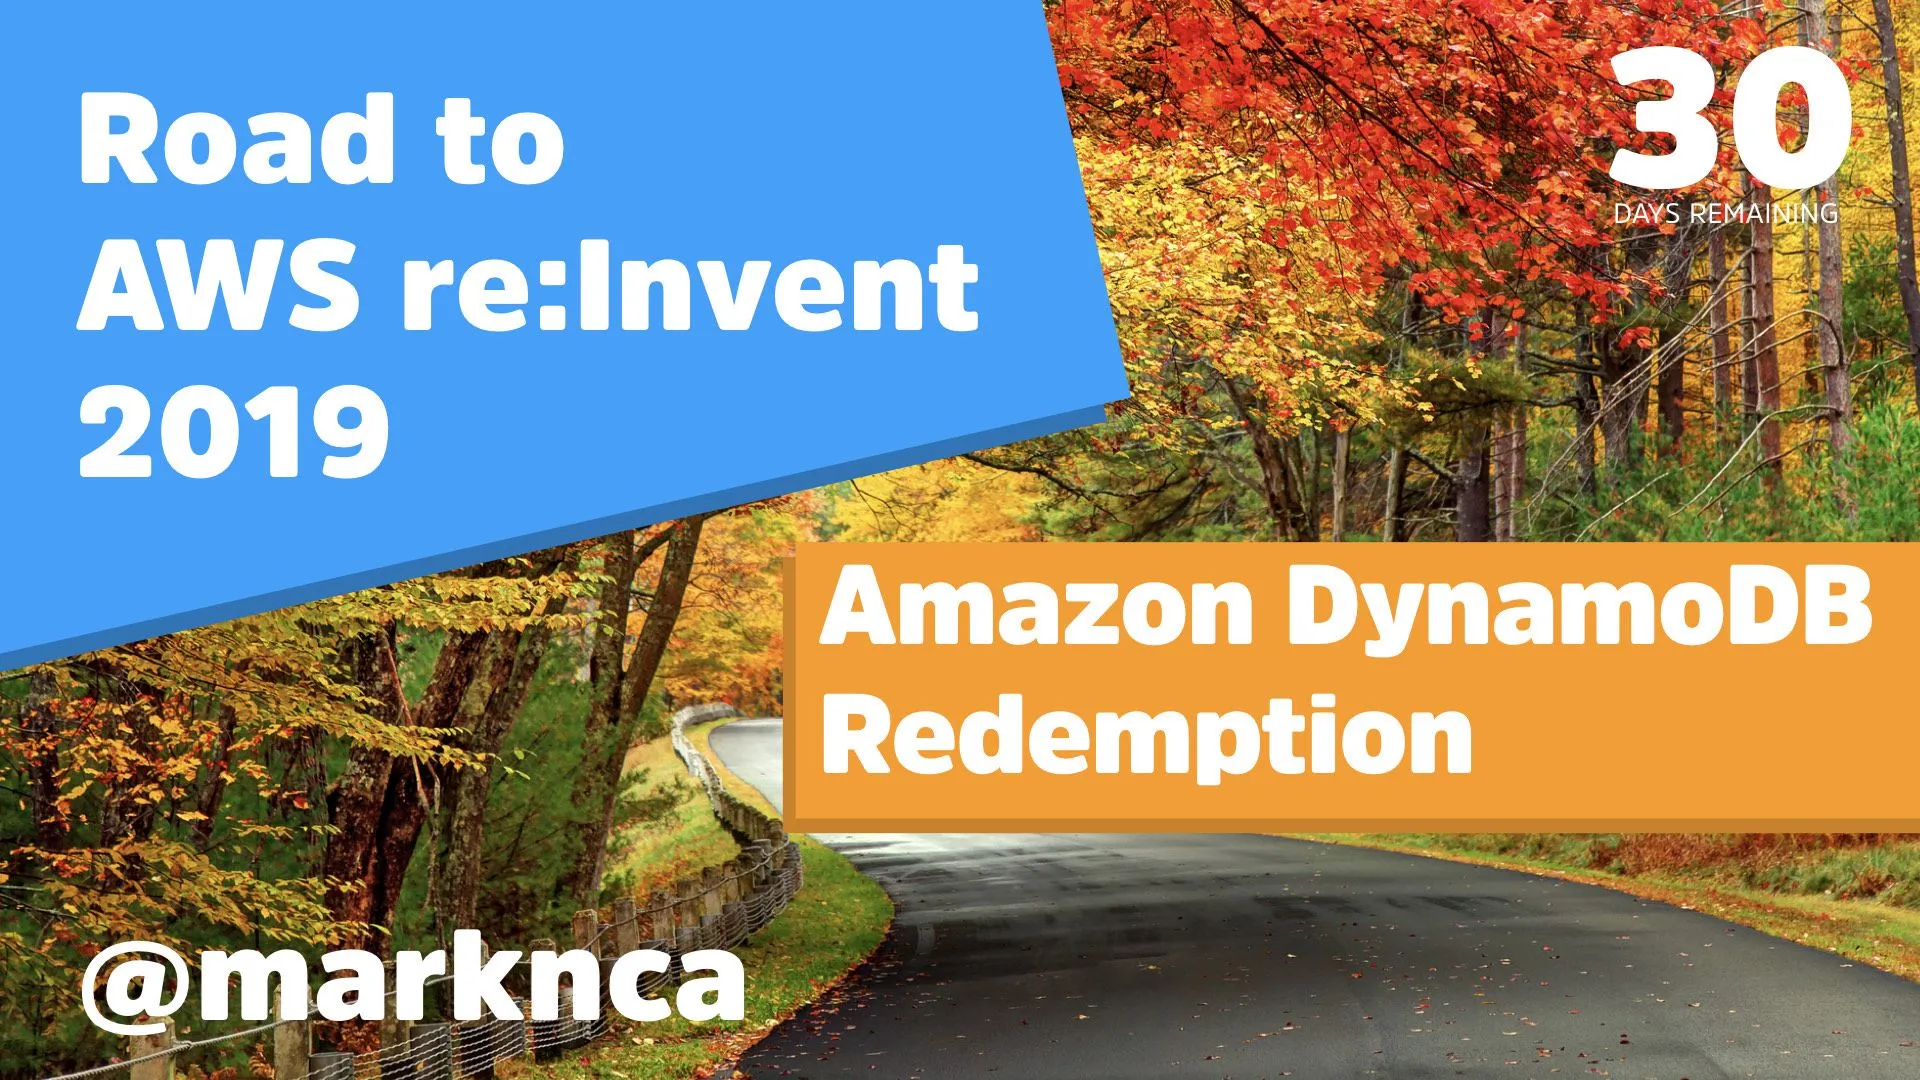 Road to re:Invent - Amazon DynamoDB Redemption